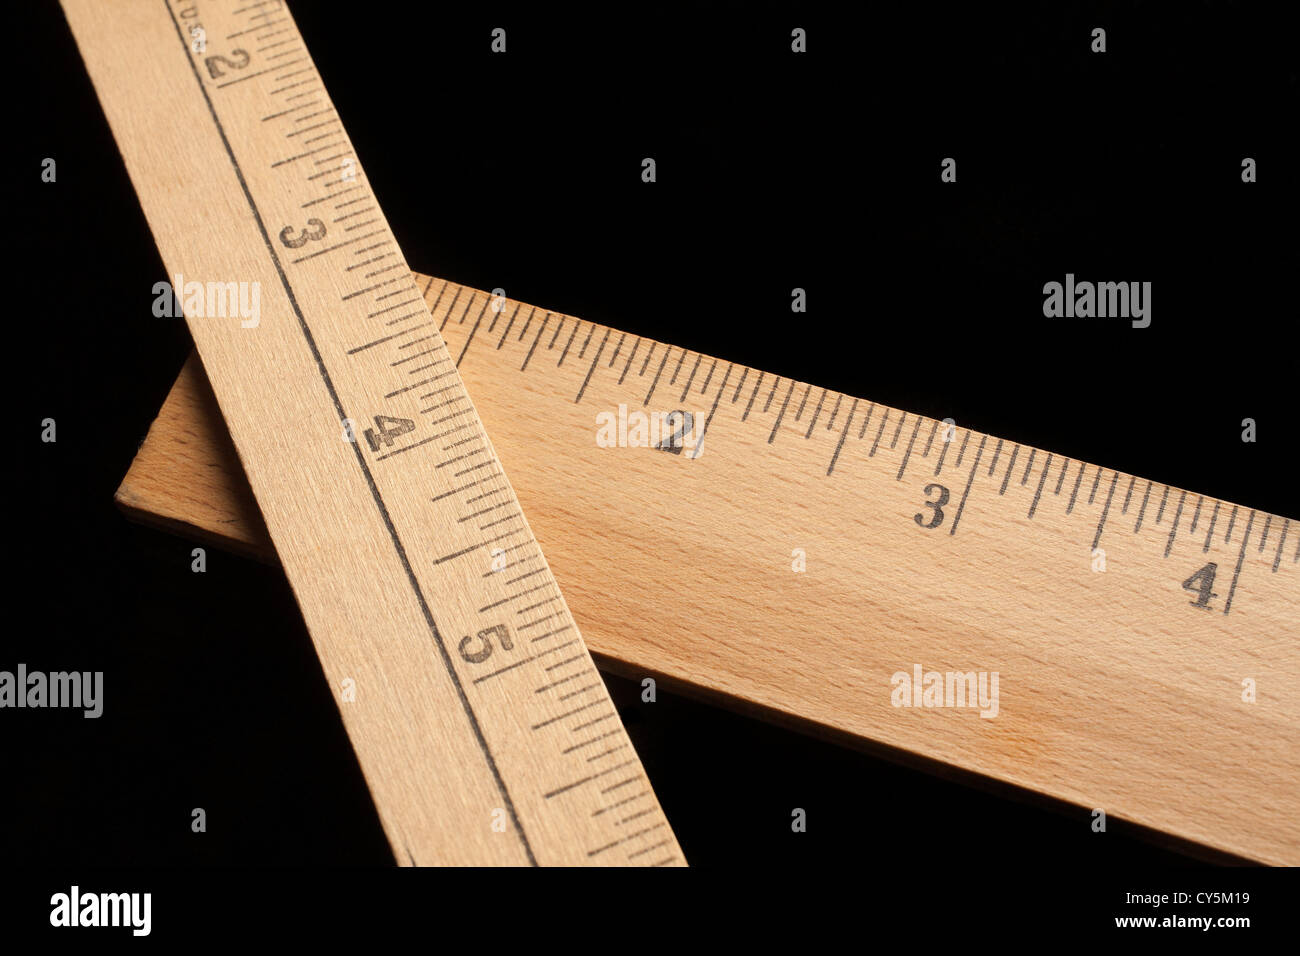 A pair of wooden rulers on a black background Stock Photo